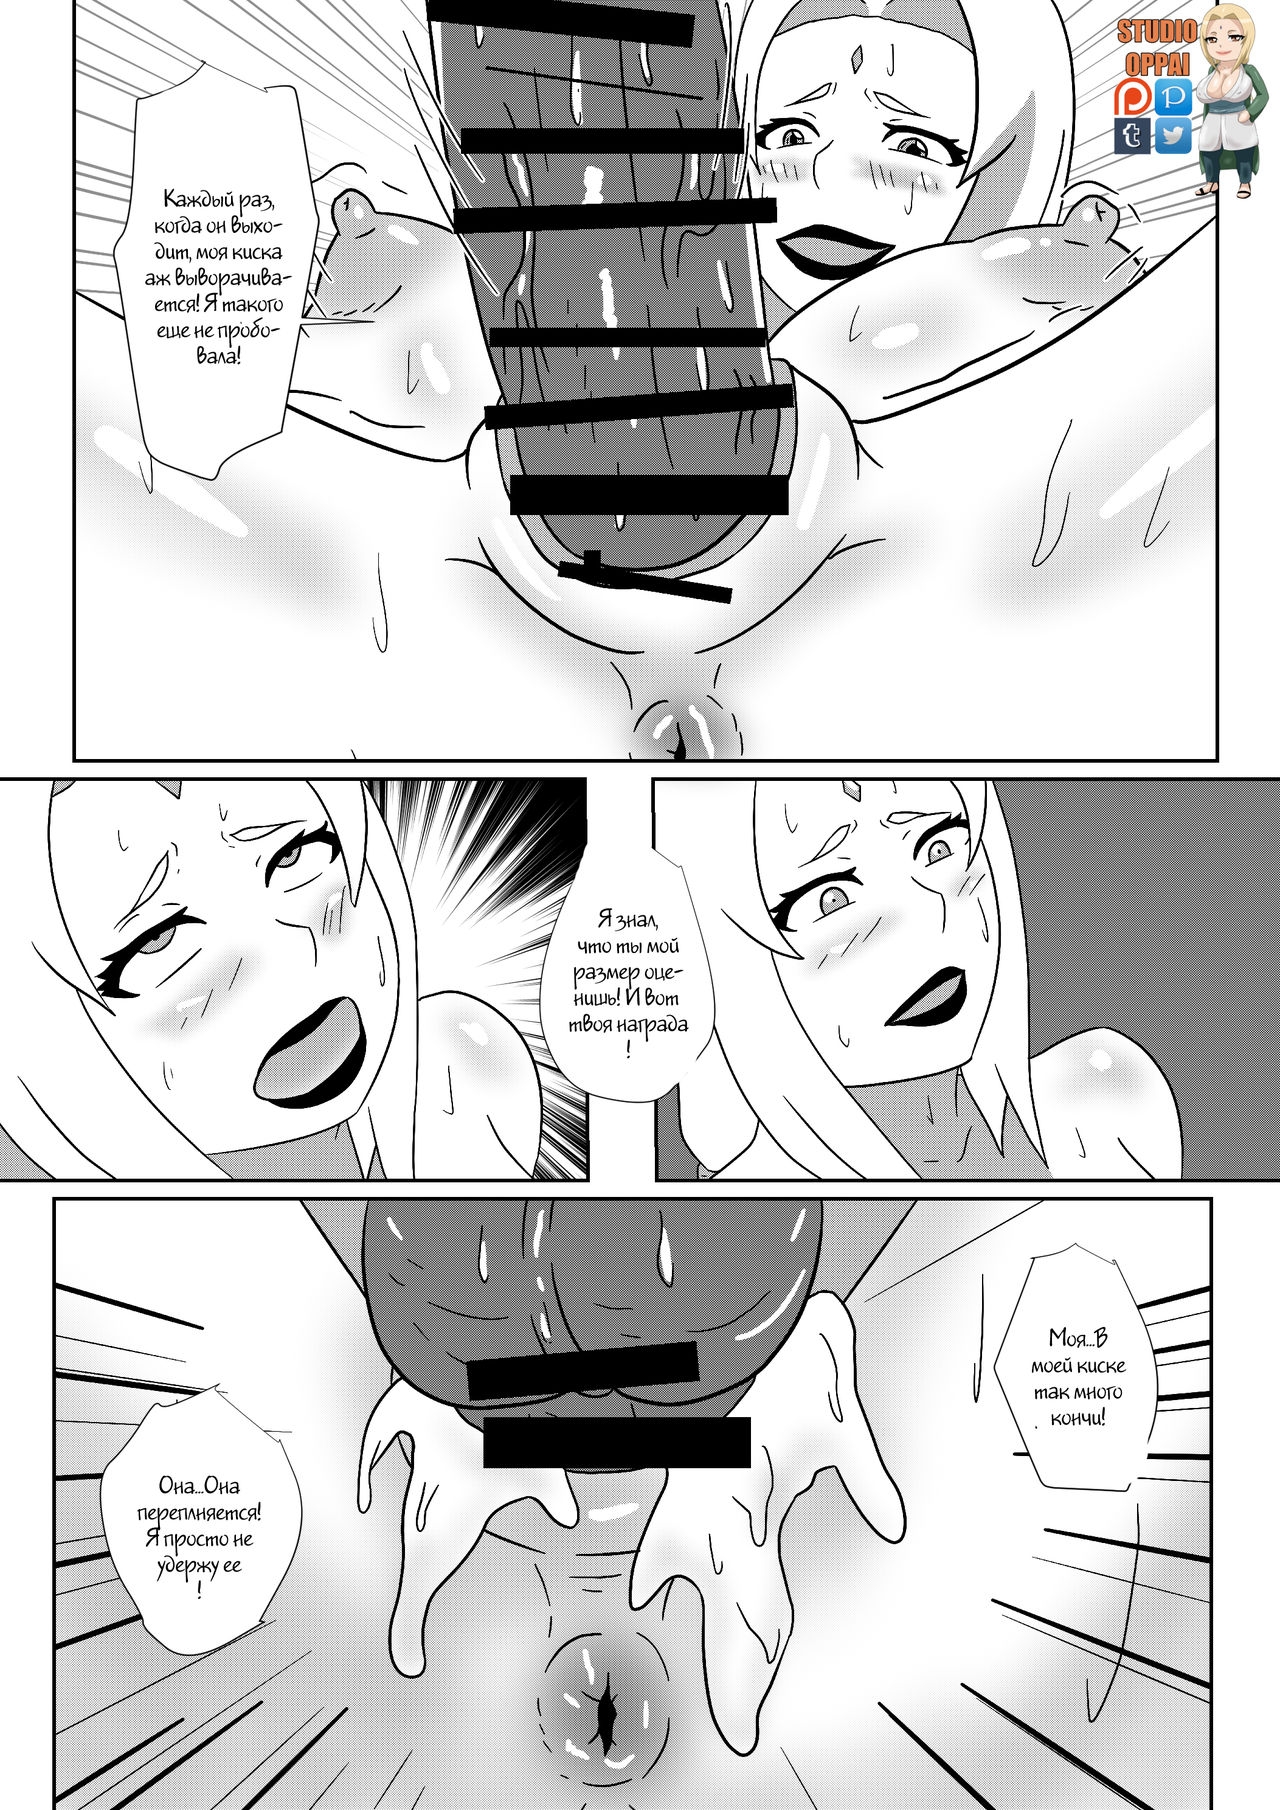 [Studio Oppai] Negotiations with Raikage (Naruto) [Russian] [Witcher000] 7